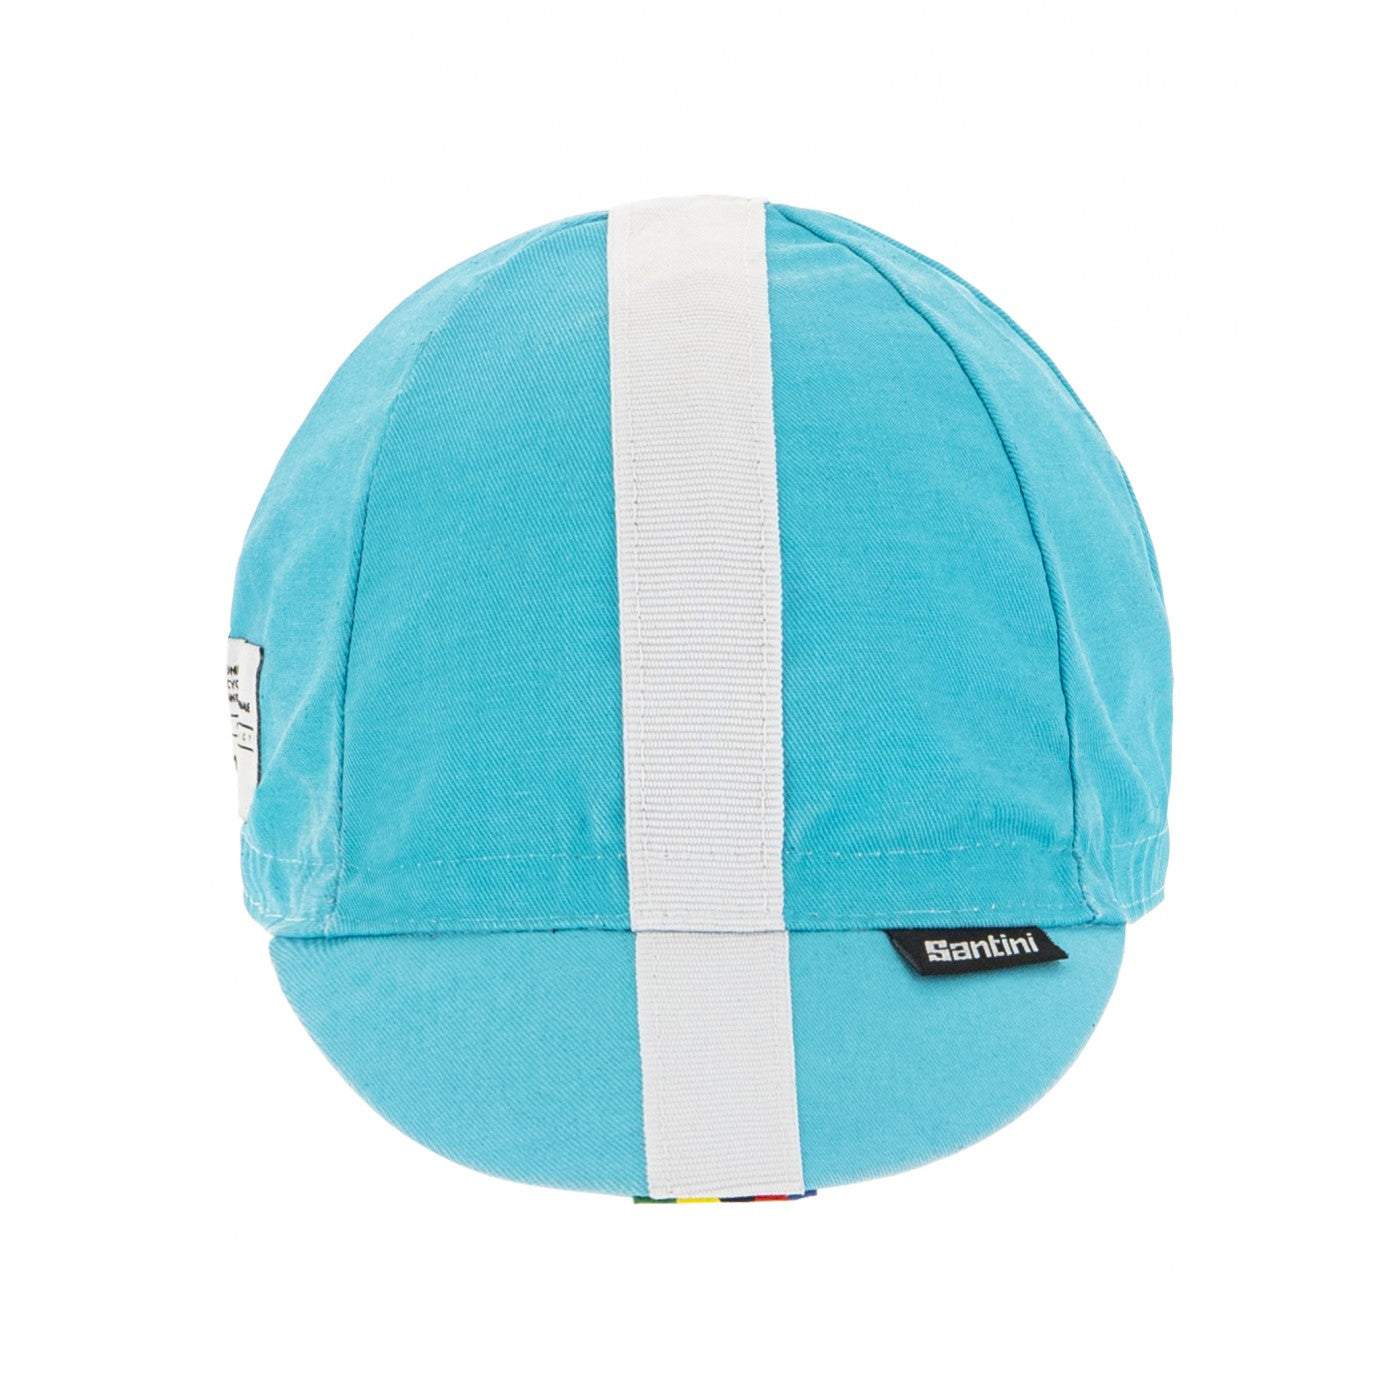 Santini UCI Official Cycling Cap - Blue - Cyclop.in